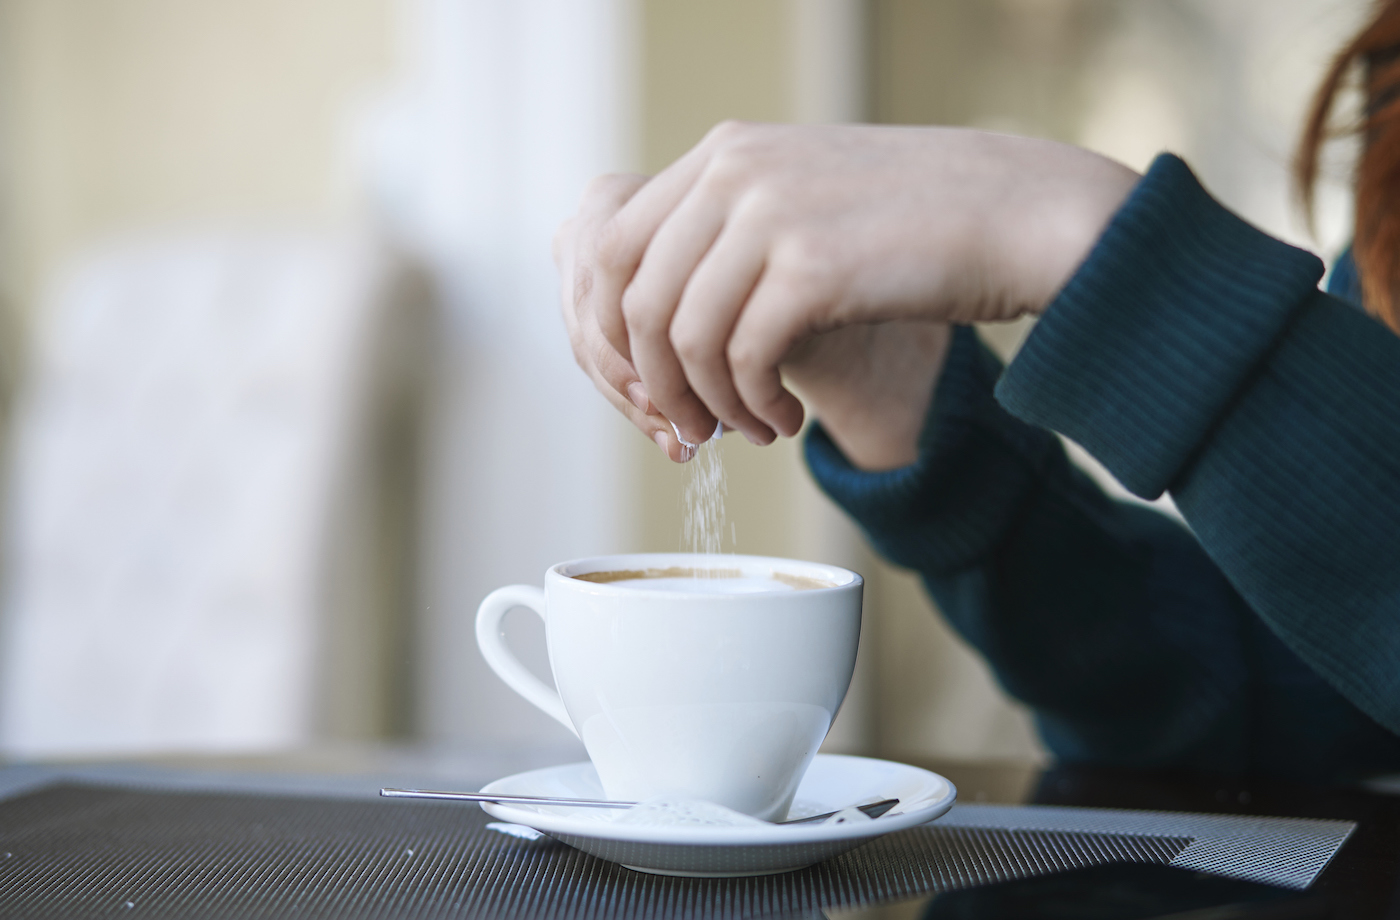 white sugar substitutes woman pouring sugar into coffee